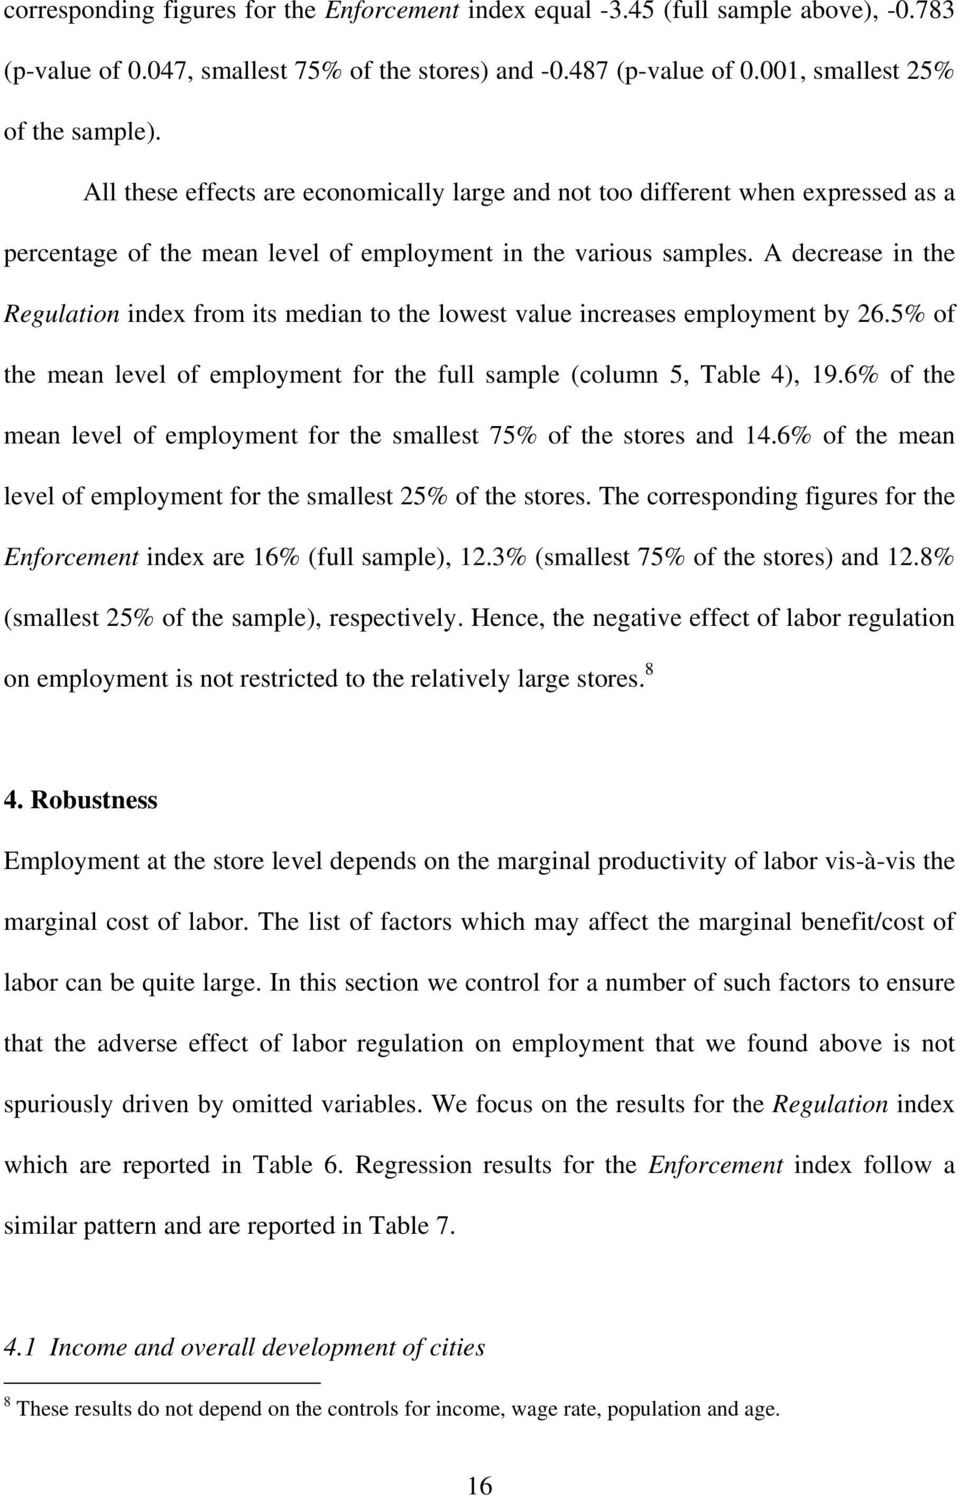 A decrease in the Regulation index from its median to the lowest value increases employment by 26.5% of the mean level of employment for the full sample (column 5, Table 4), 19.